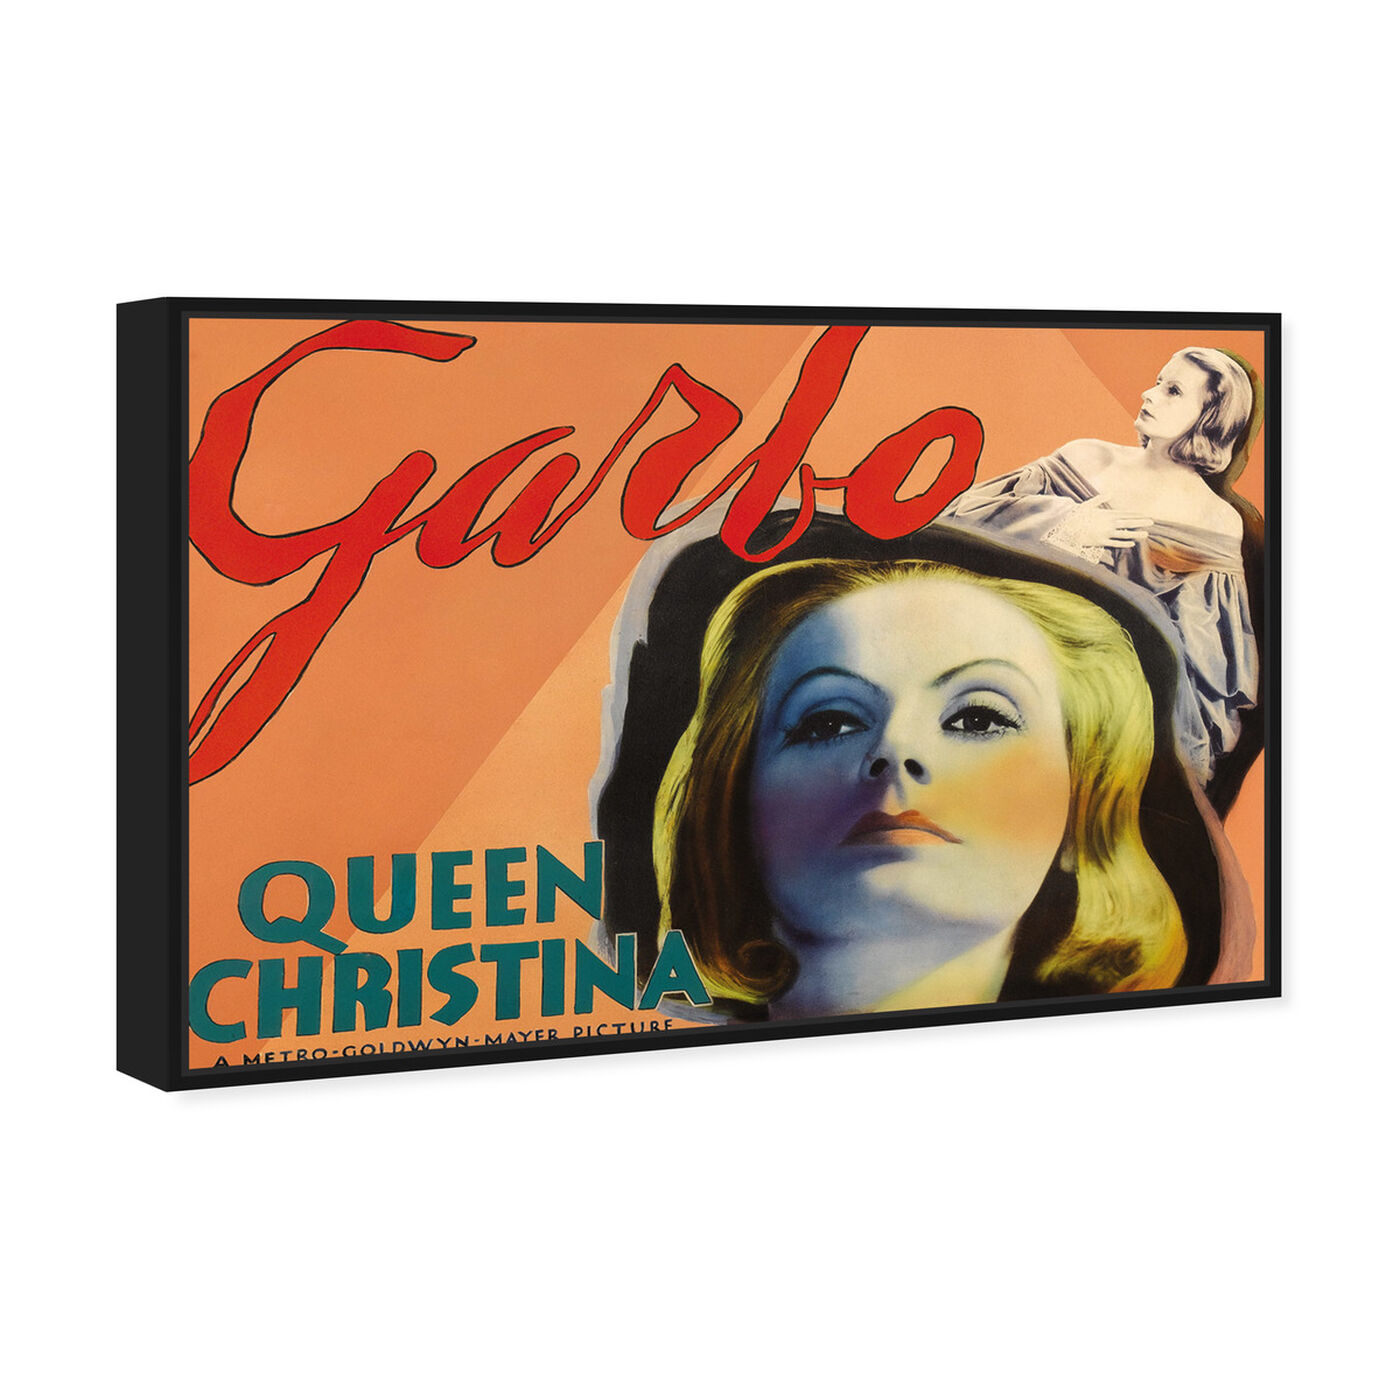 Angled view of Garbo featuring advertising and posters art.